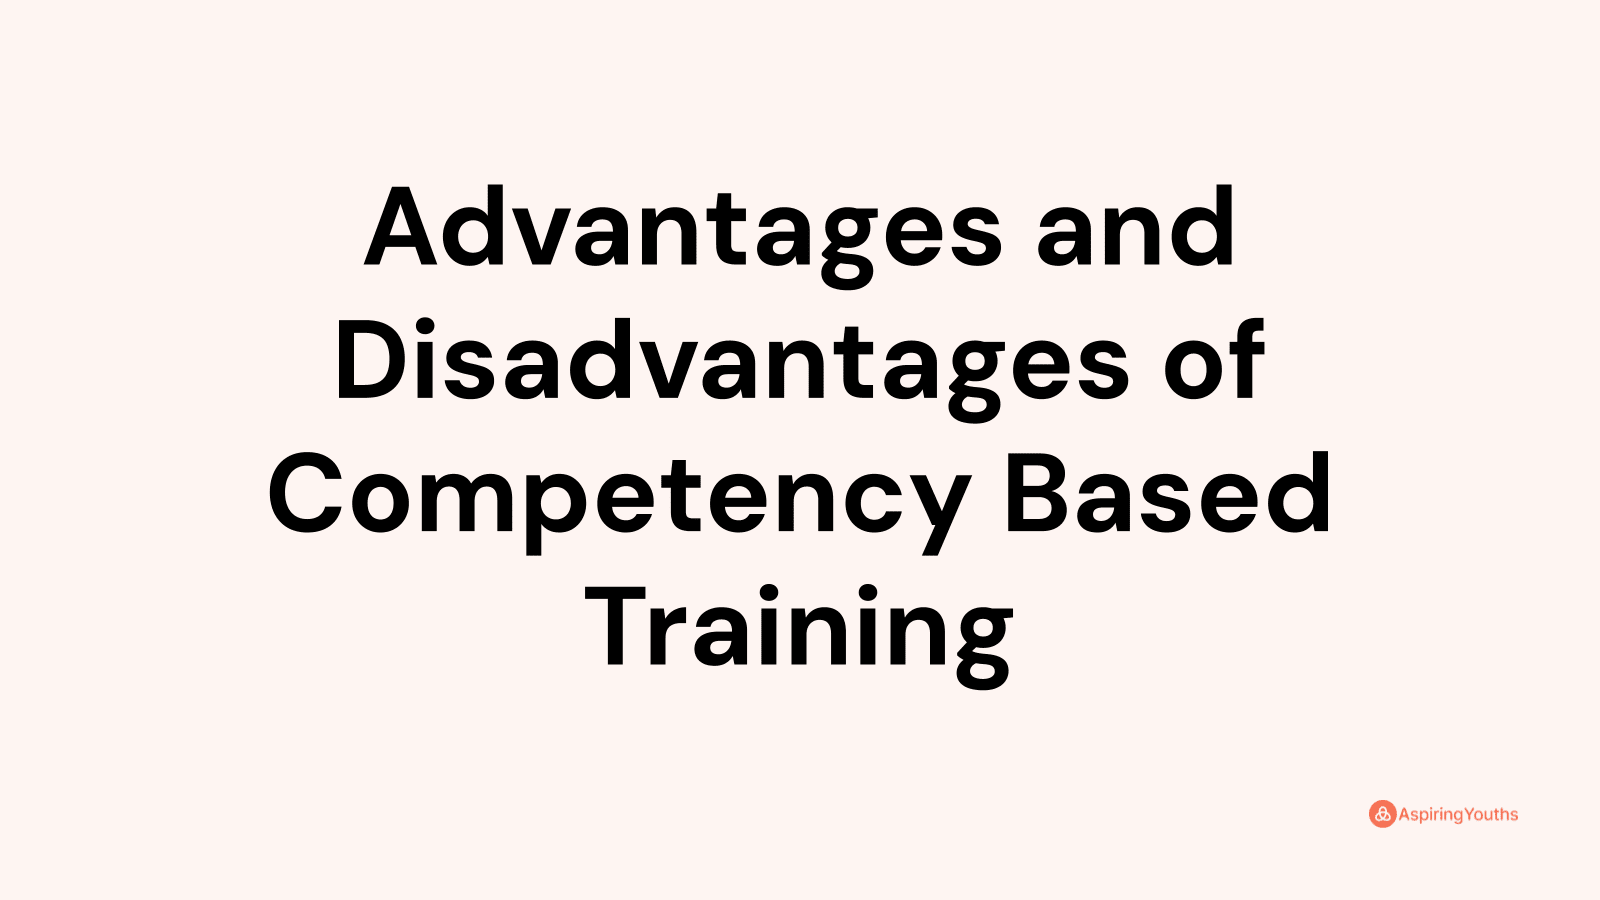 Advantages and disadvantages of Competency Based Training